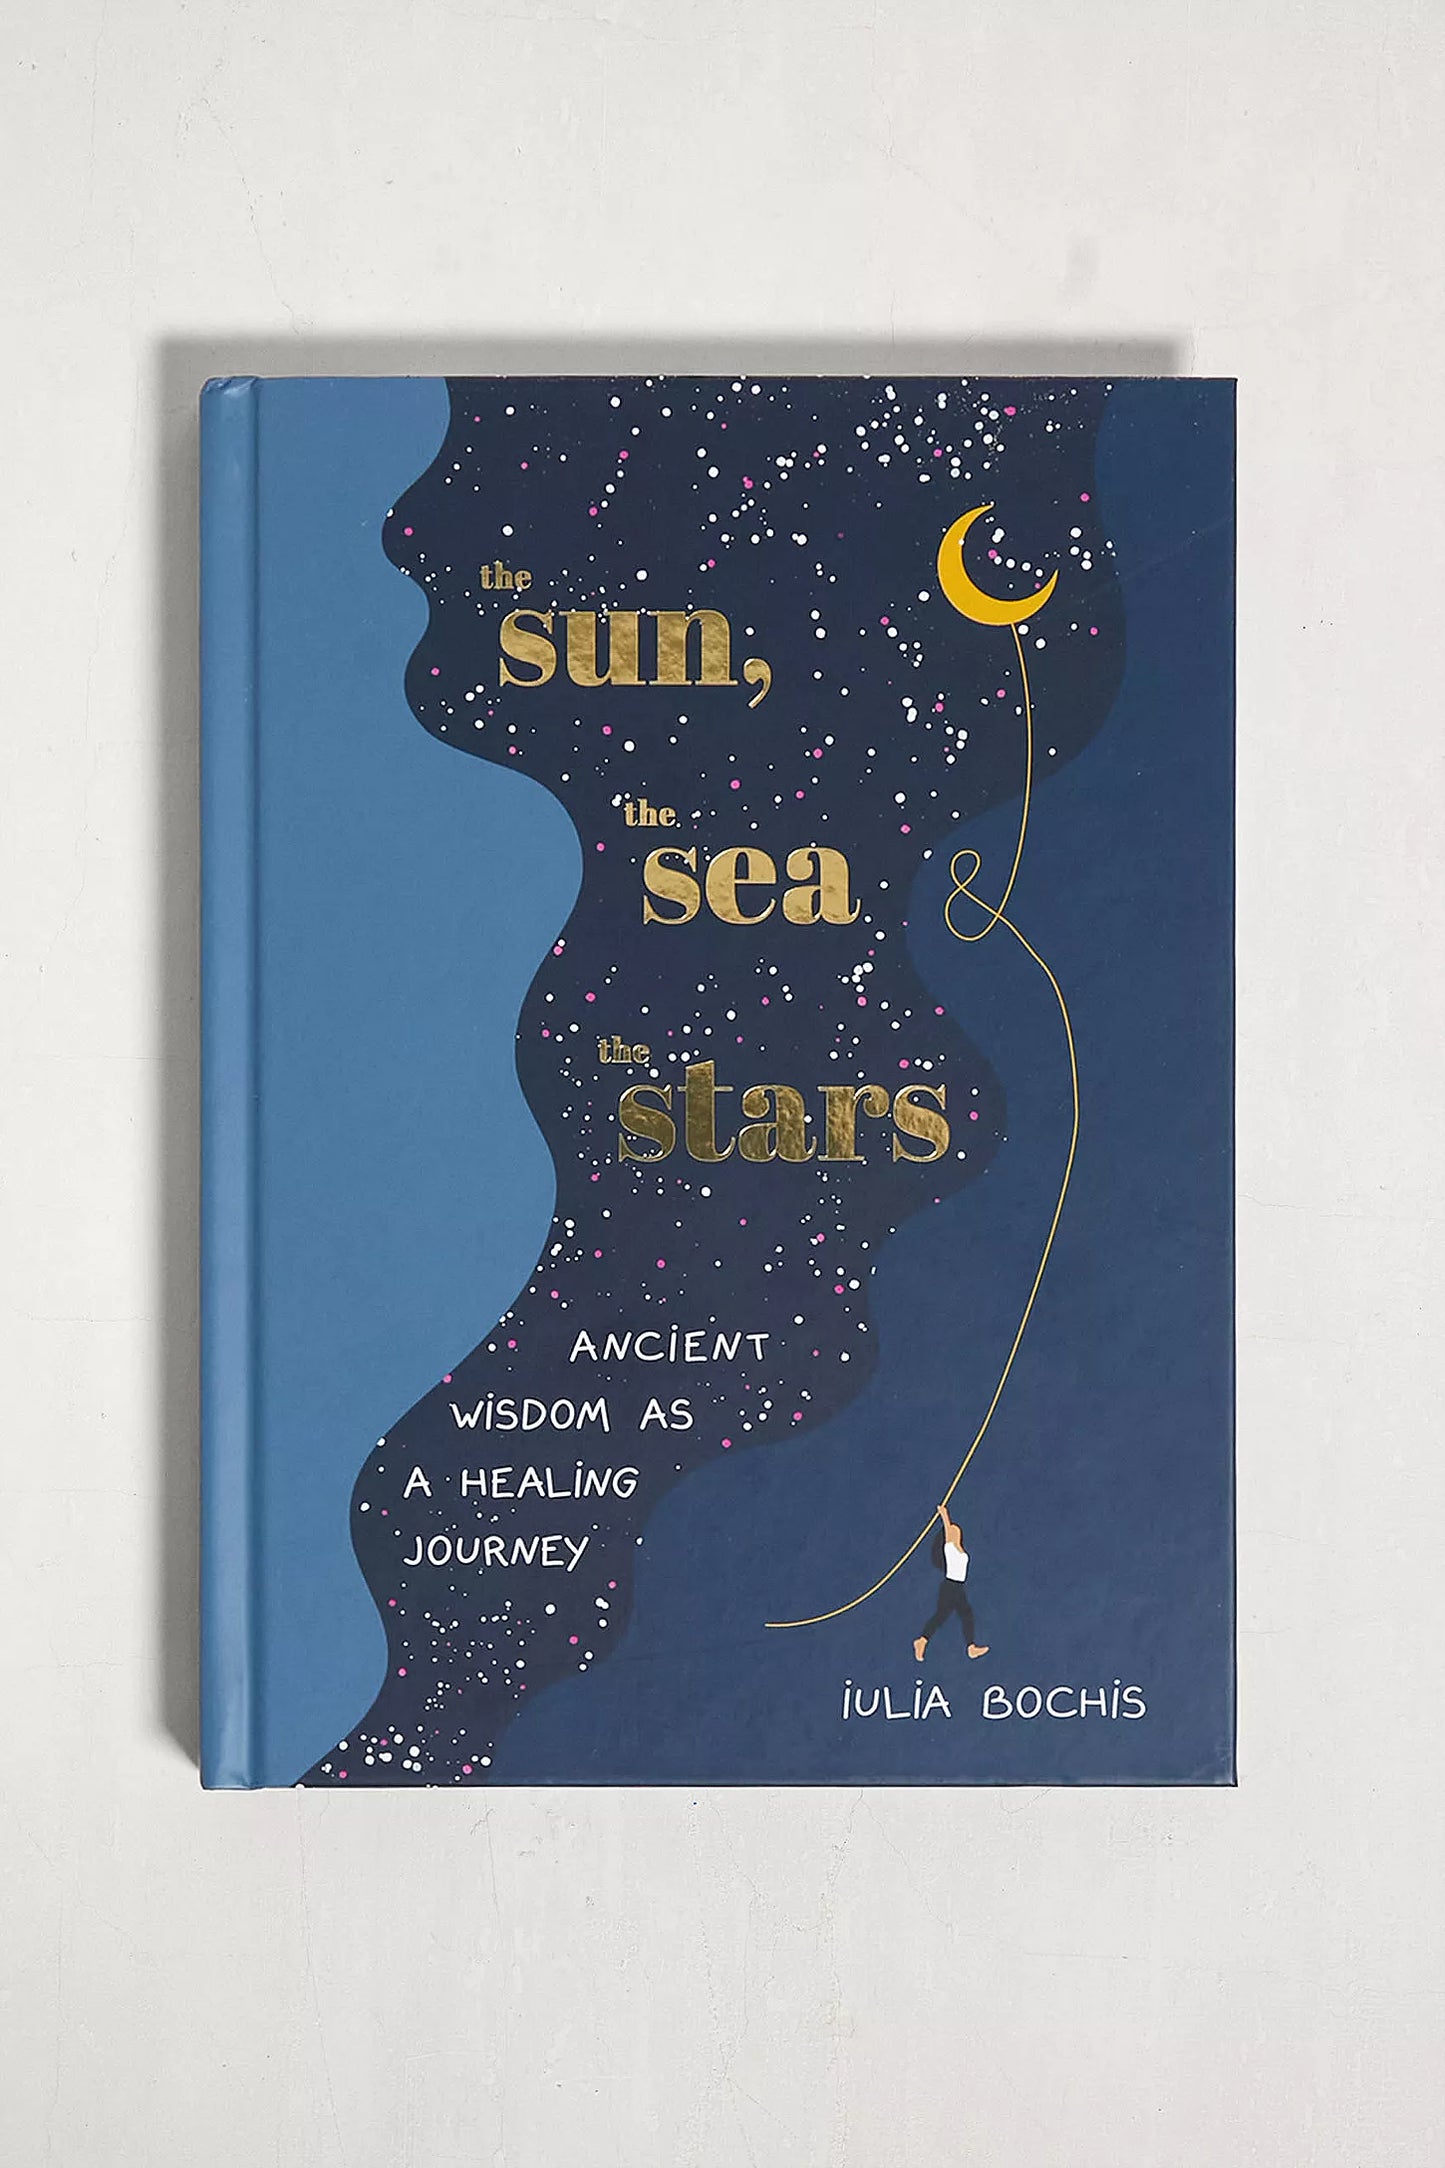 the sun, the sea, the stars: ancient wisdom as a healing journey - by iulia bochis